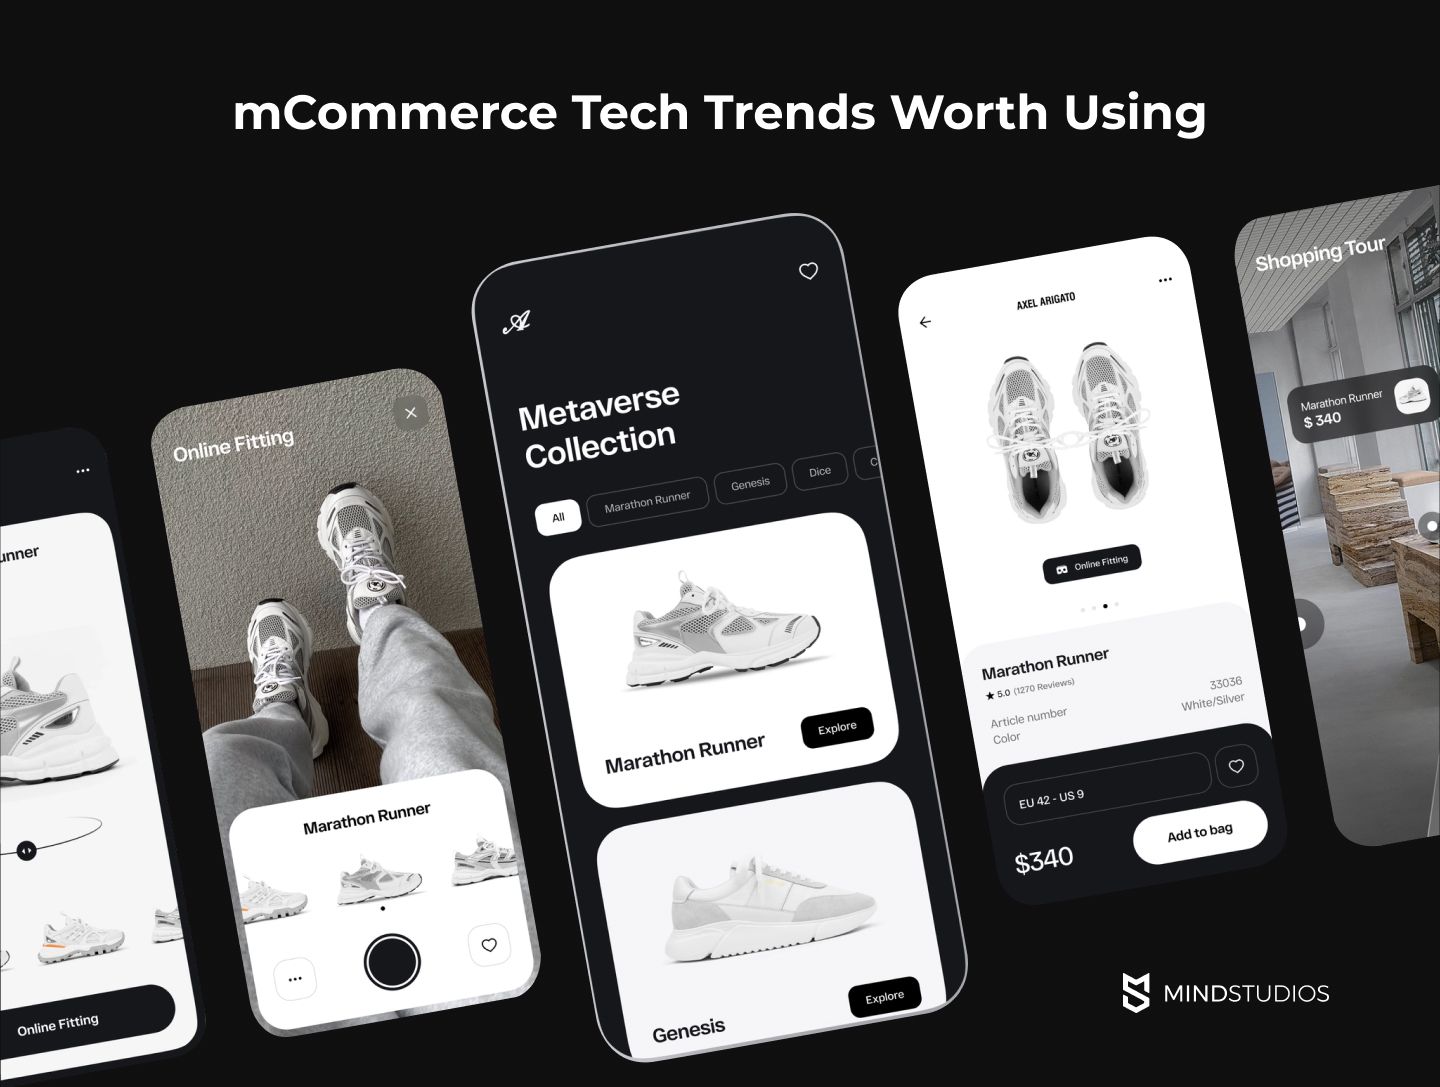 mCommerce Tech Trends Worth Using